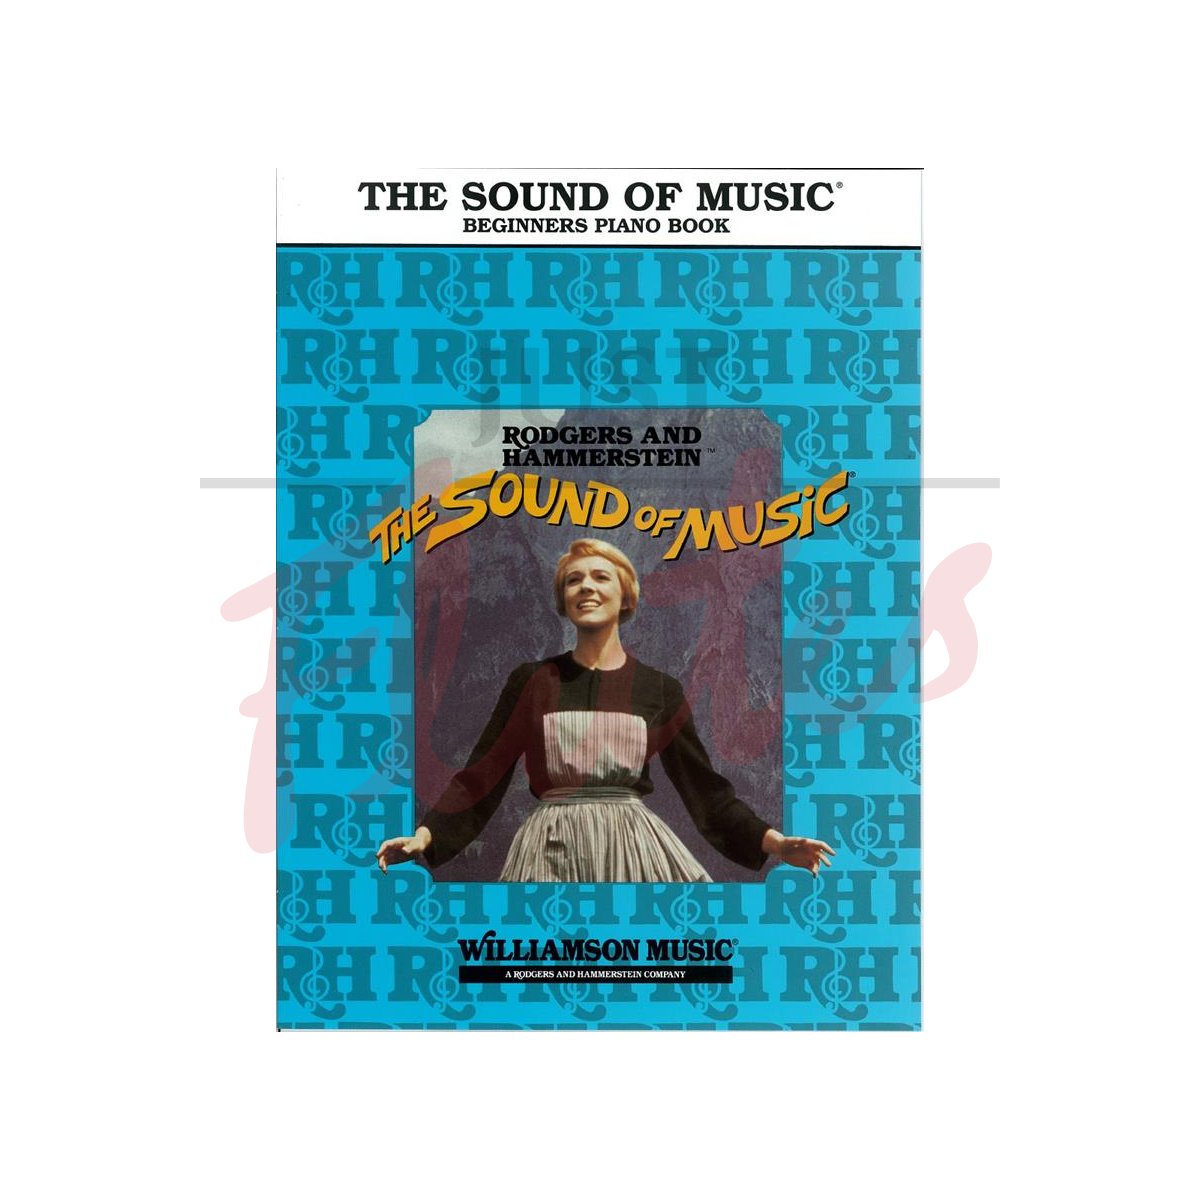 The Sound of Music: Beginner's Piano Book